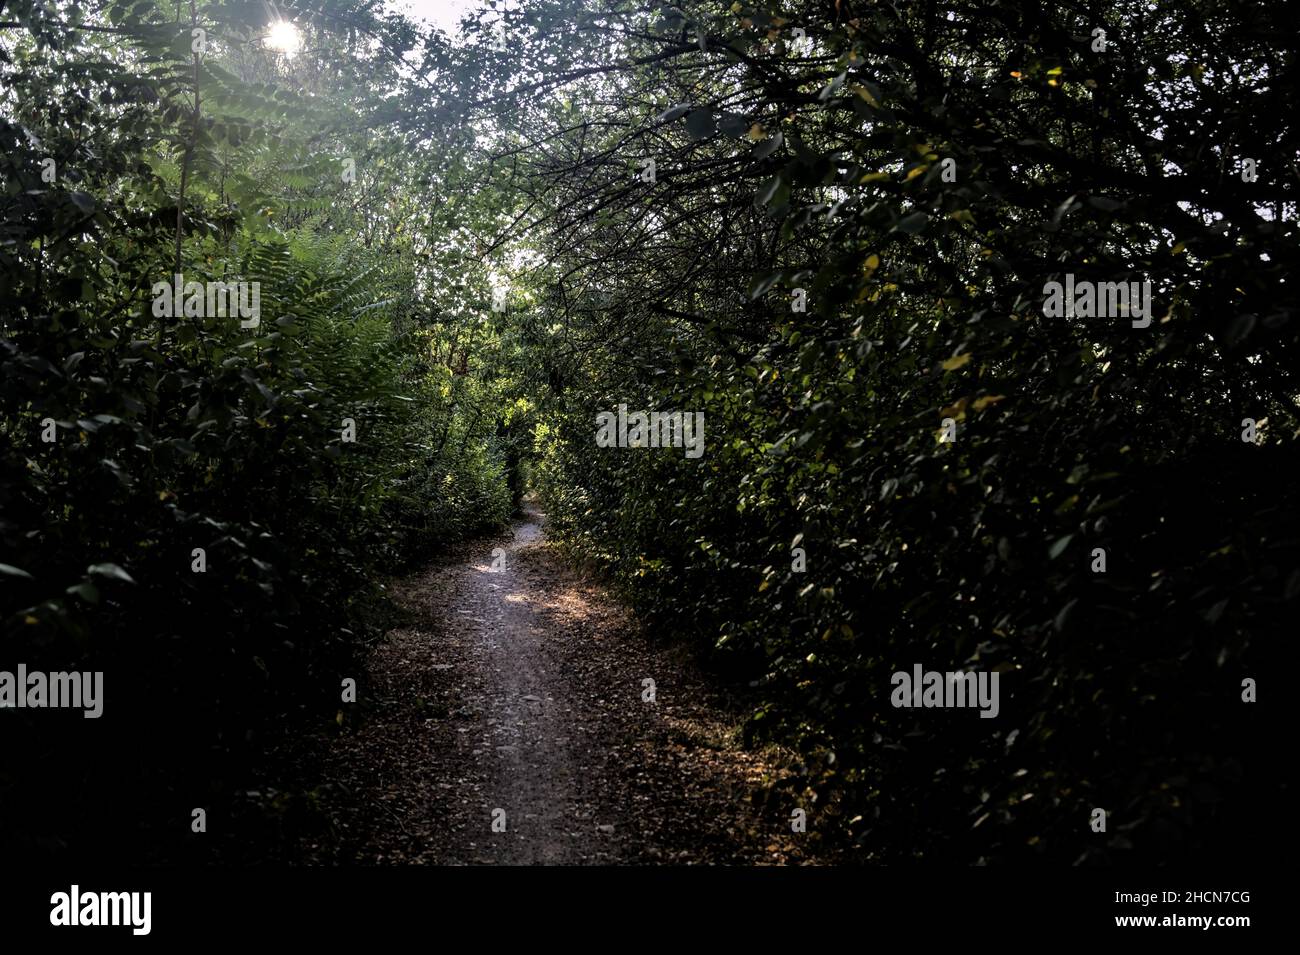 Shady path with trees arching on it in the countryside at sunset Stock Photo